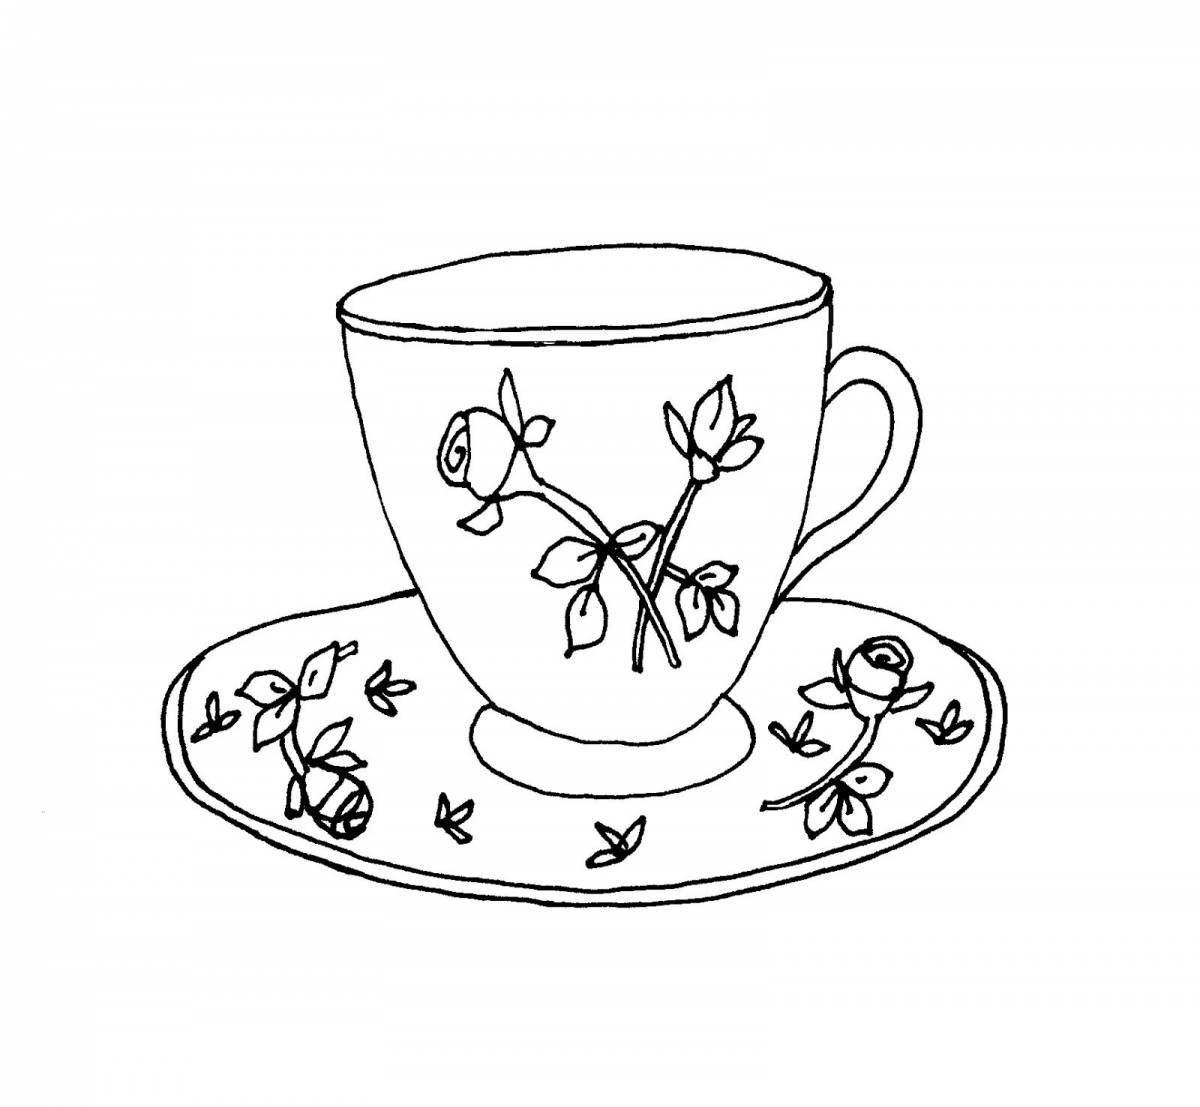 Bright mug with saucer coloring book for kids